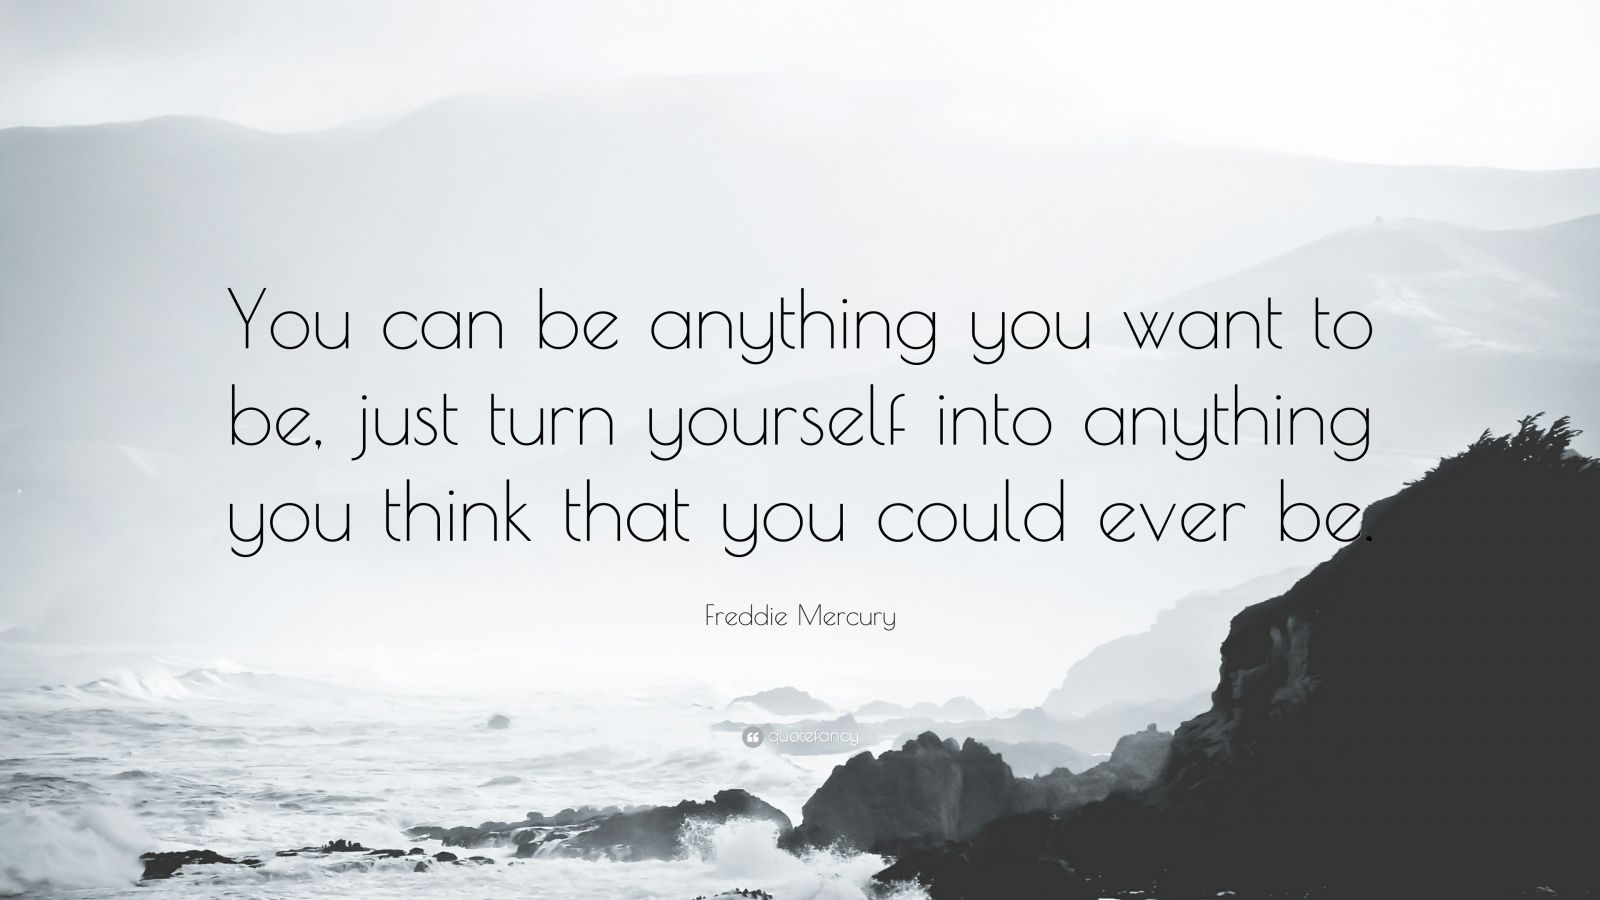 Freddie Mercury Quote: “You can be anything you want to be, just turn ...